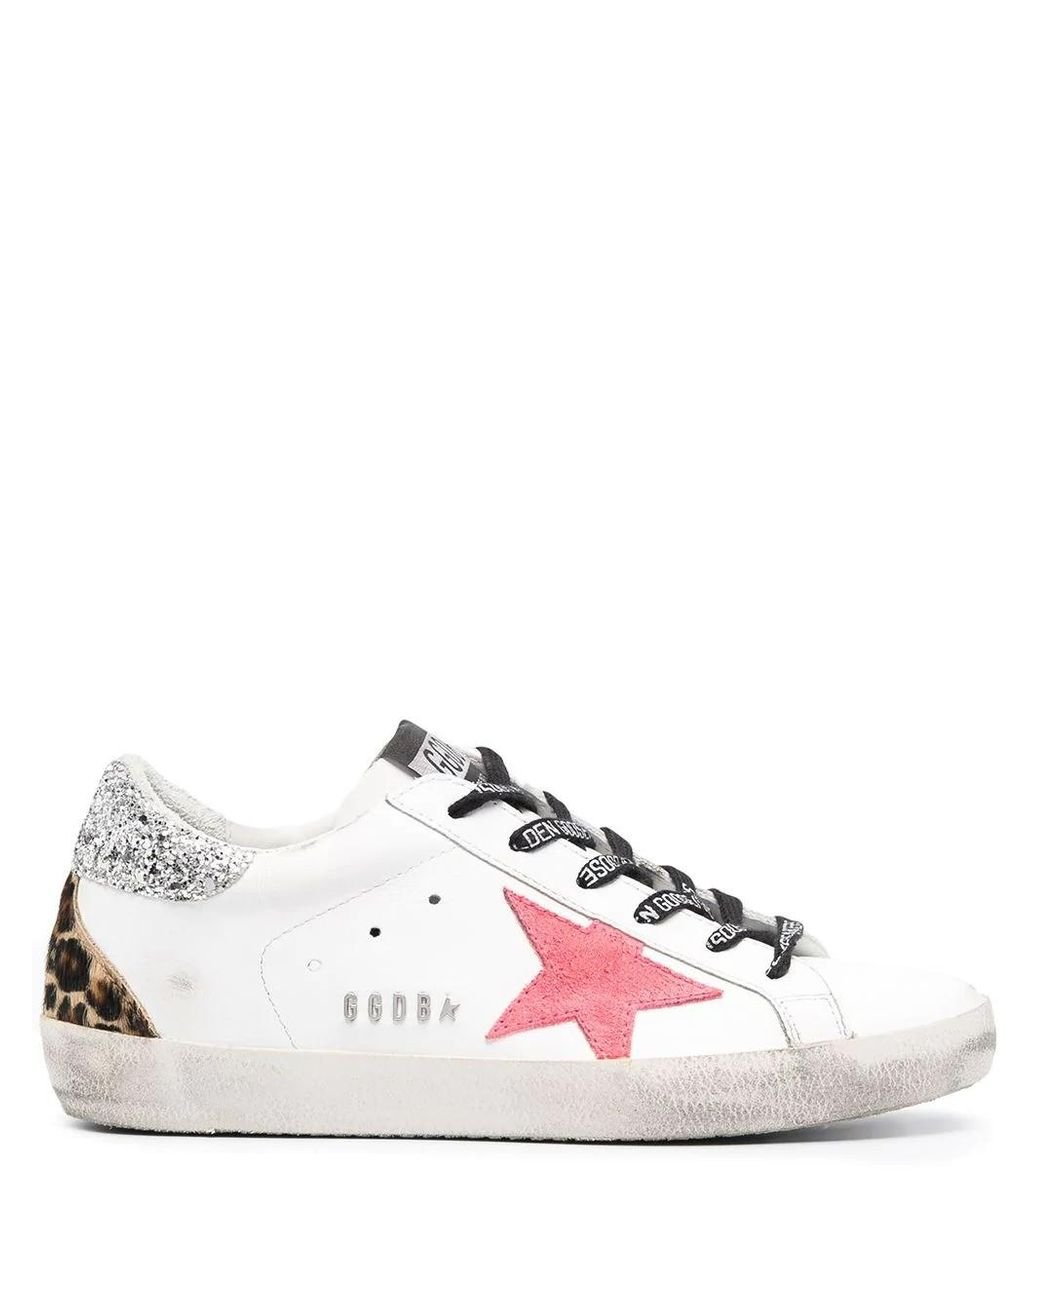 Golden Goose Deluxe Brand Leather Superstar Sneakers in White - Lyst